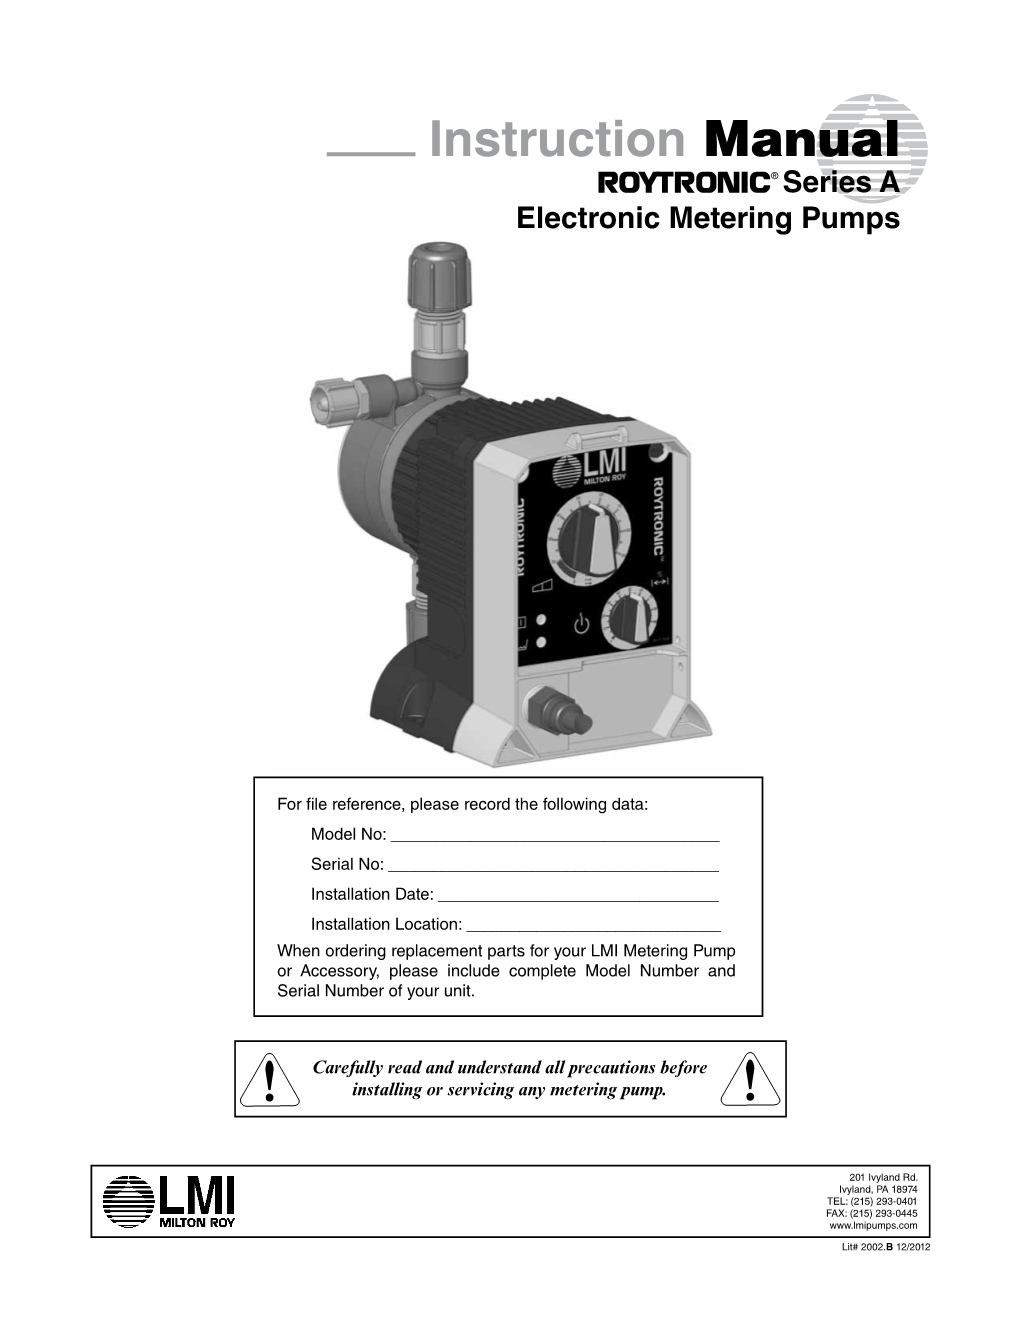 Instruction Manual ® Series a Electronic Metering Pumps